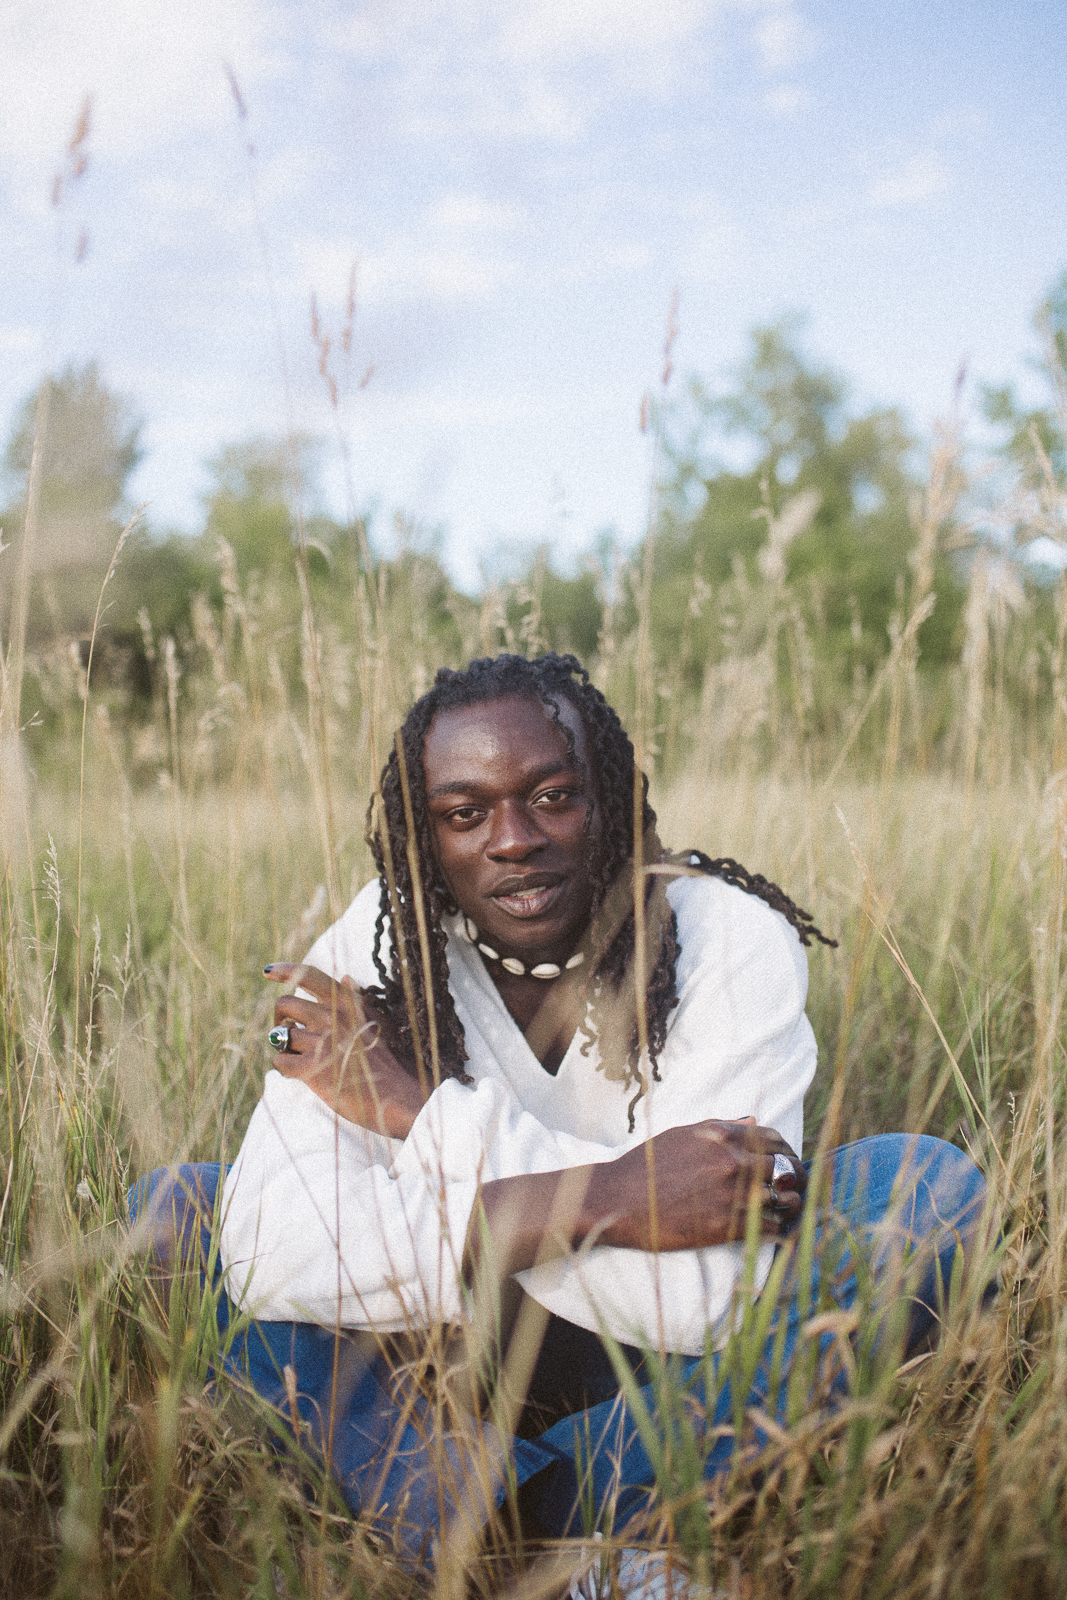 Headshot of Pilot Episode Choreographer Kwasi Obeng, dark skin male in white shirt and jeans surrounded in green field with trees and blue sky